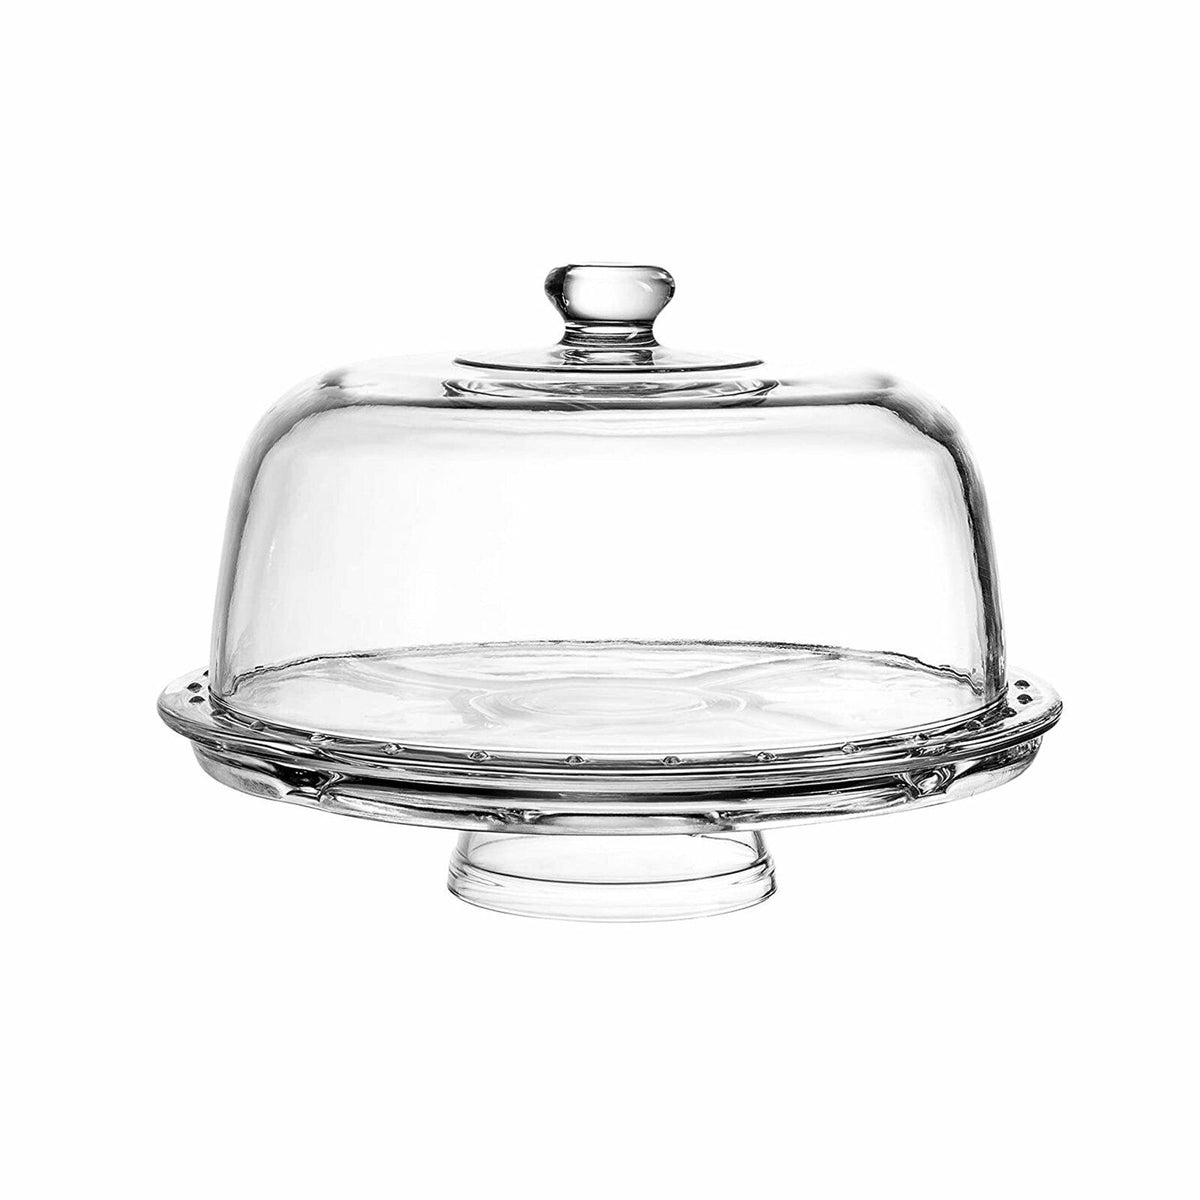 12" Clear Acrylic Cake Stand Serving Platter Wedding Home Party Decor